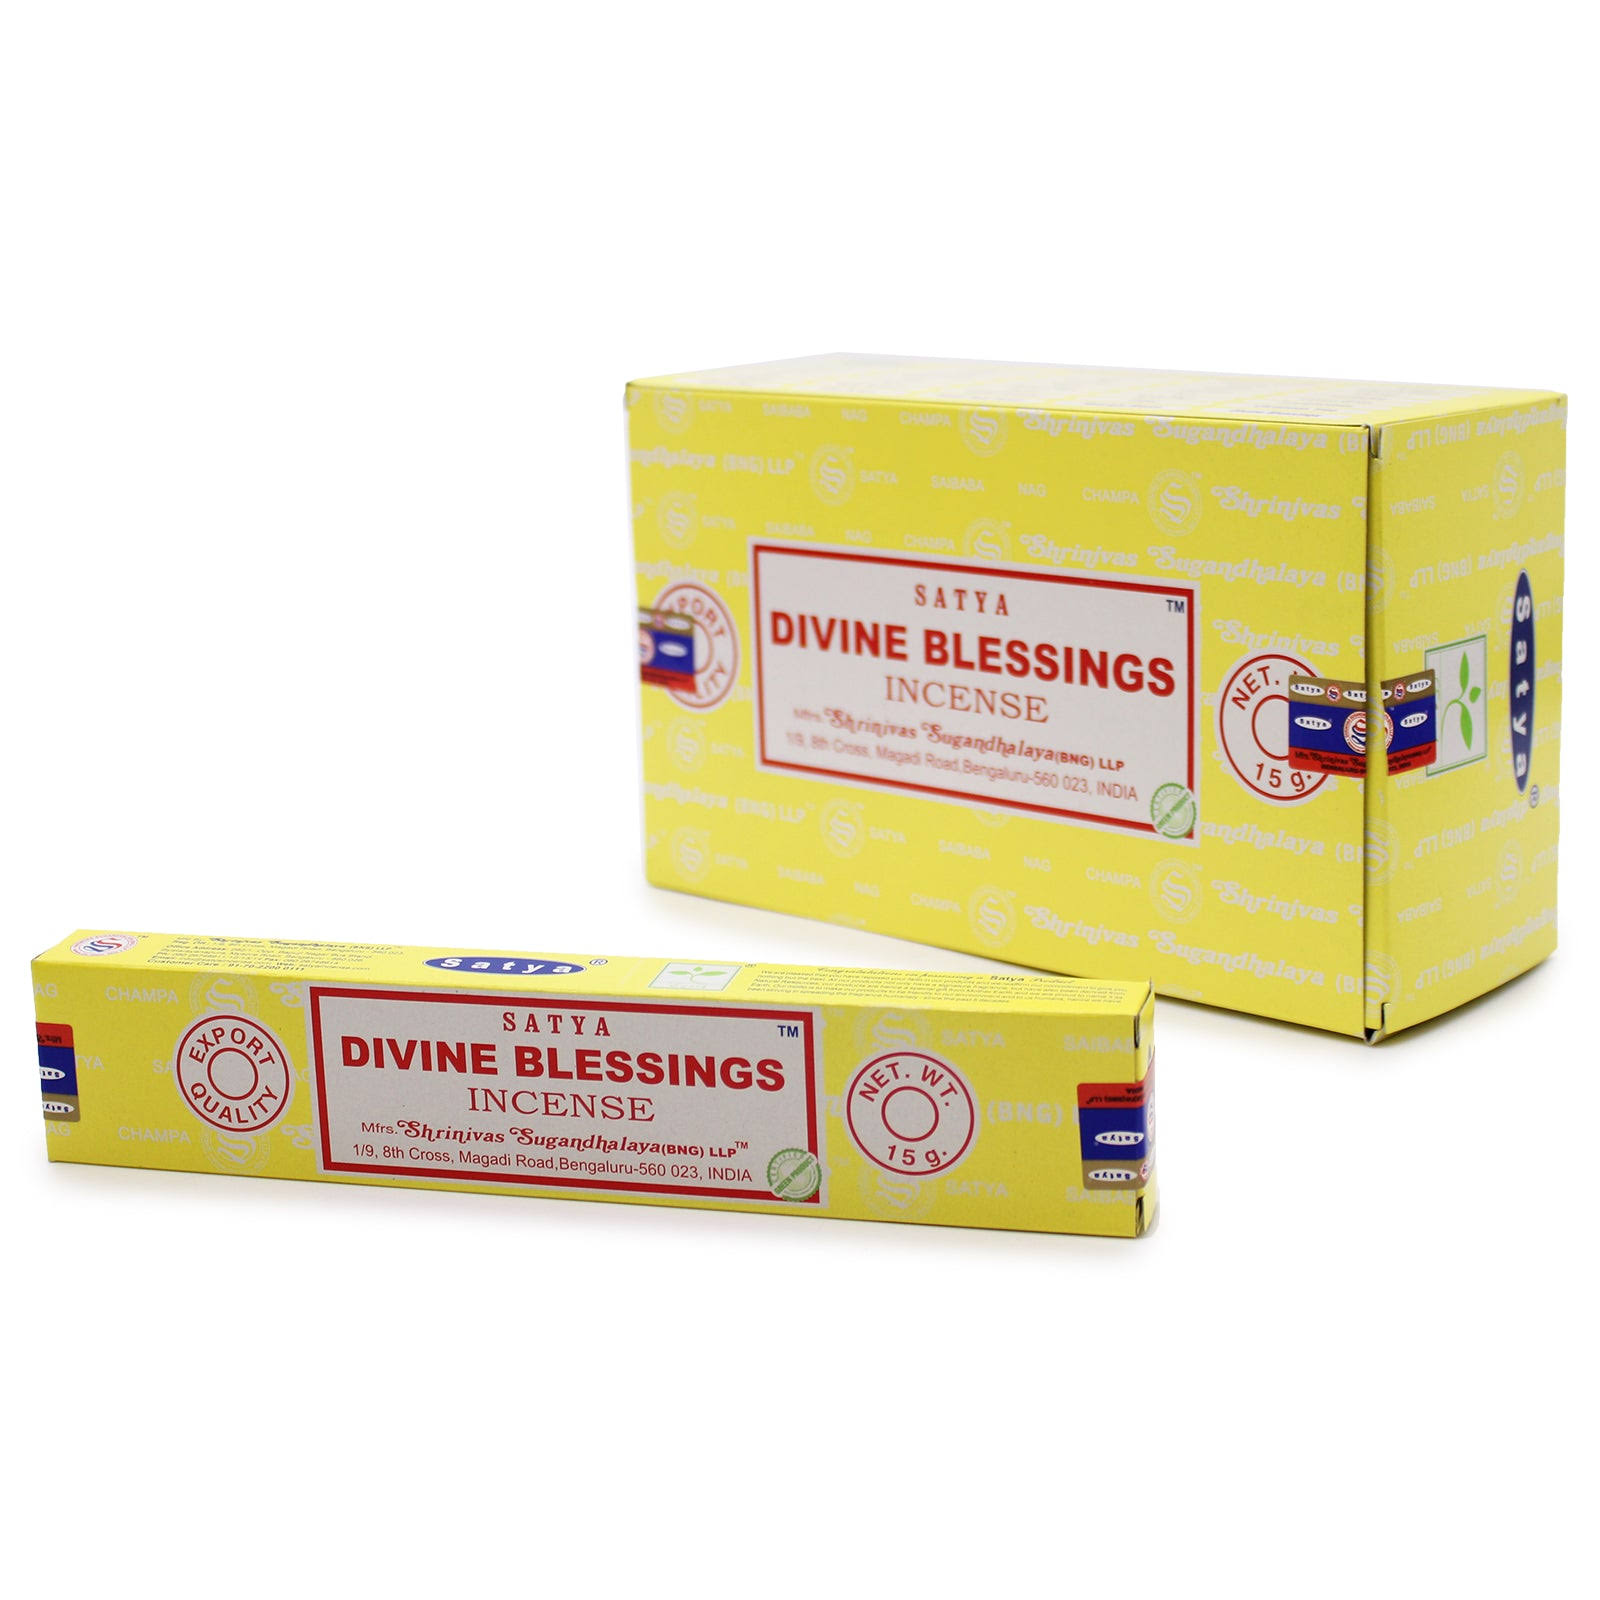 Divine Blessings Incense Sticks by Satya